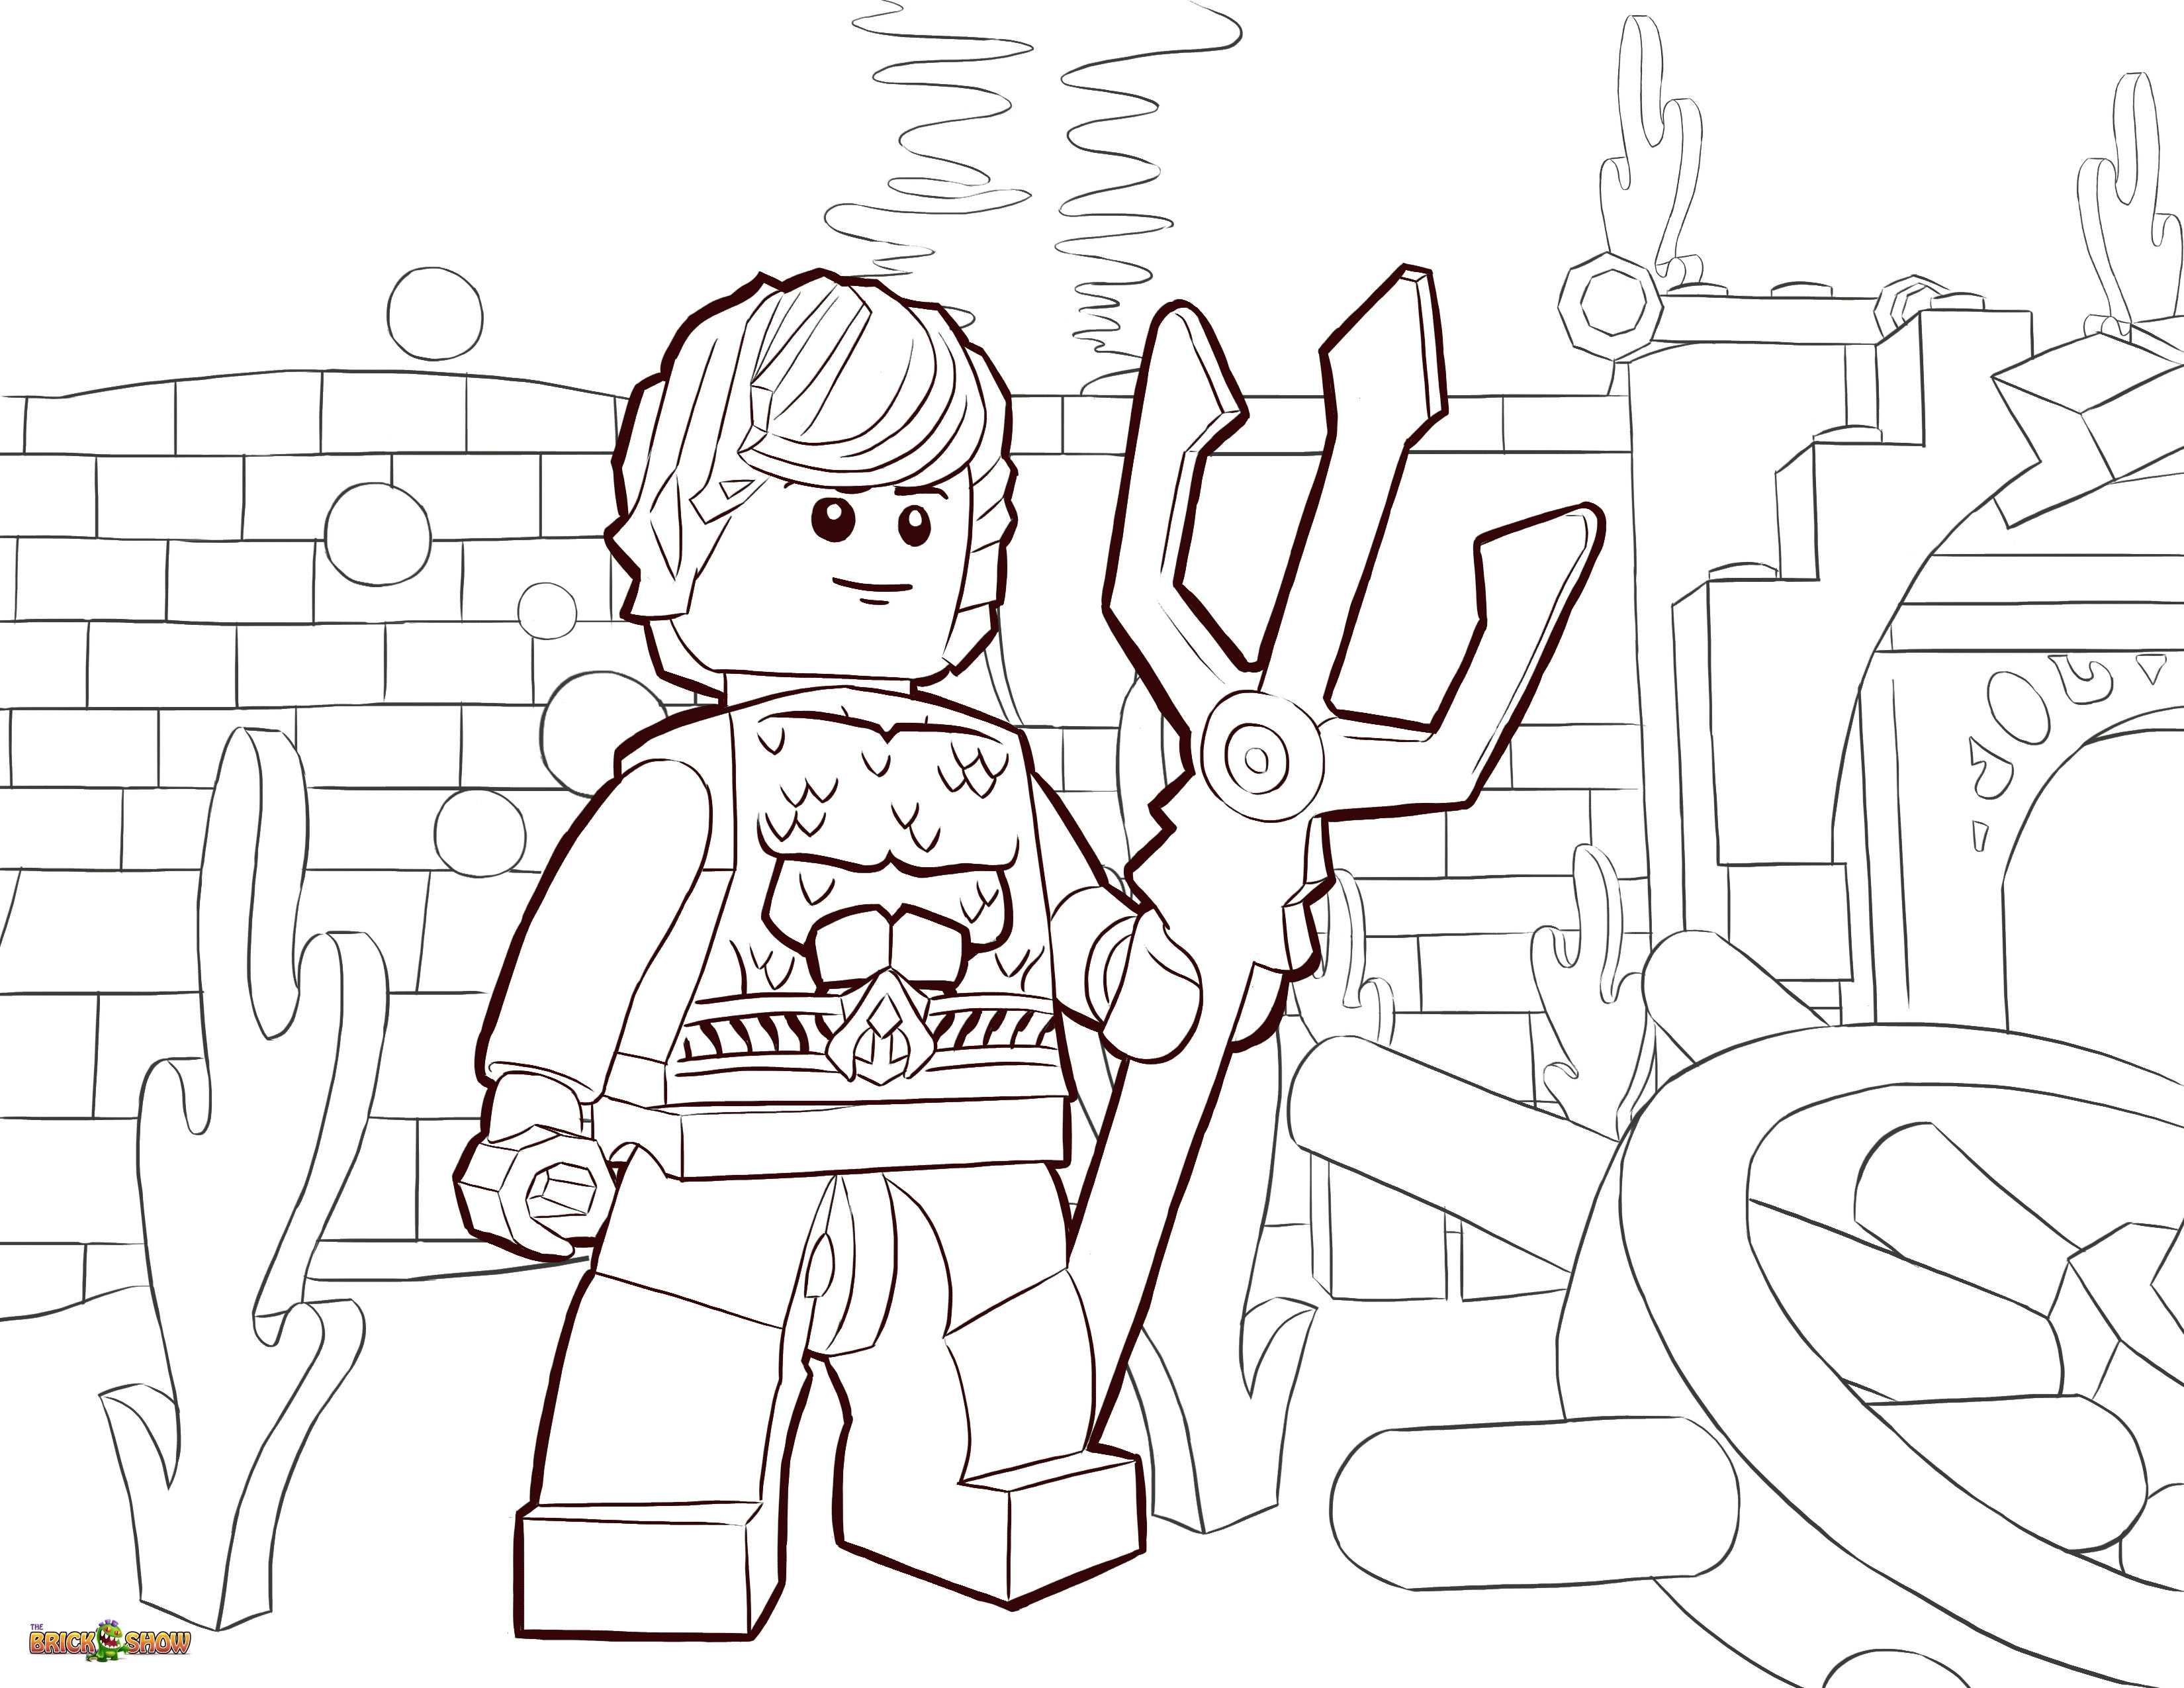 Lego Superheroes Coloring Pages - Coloring Page Photos